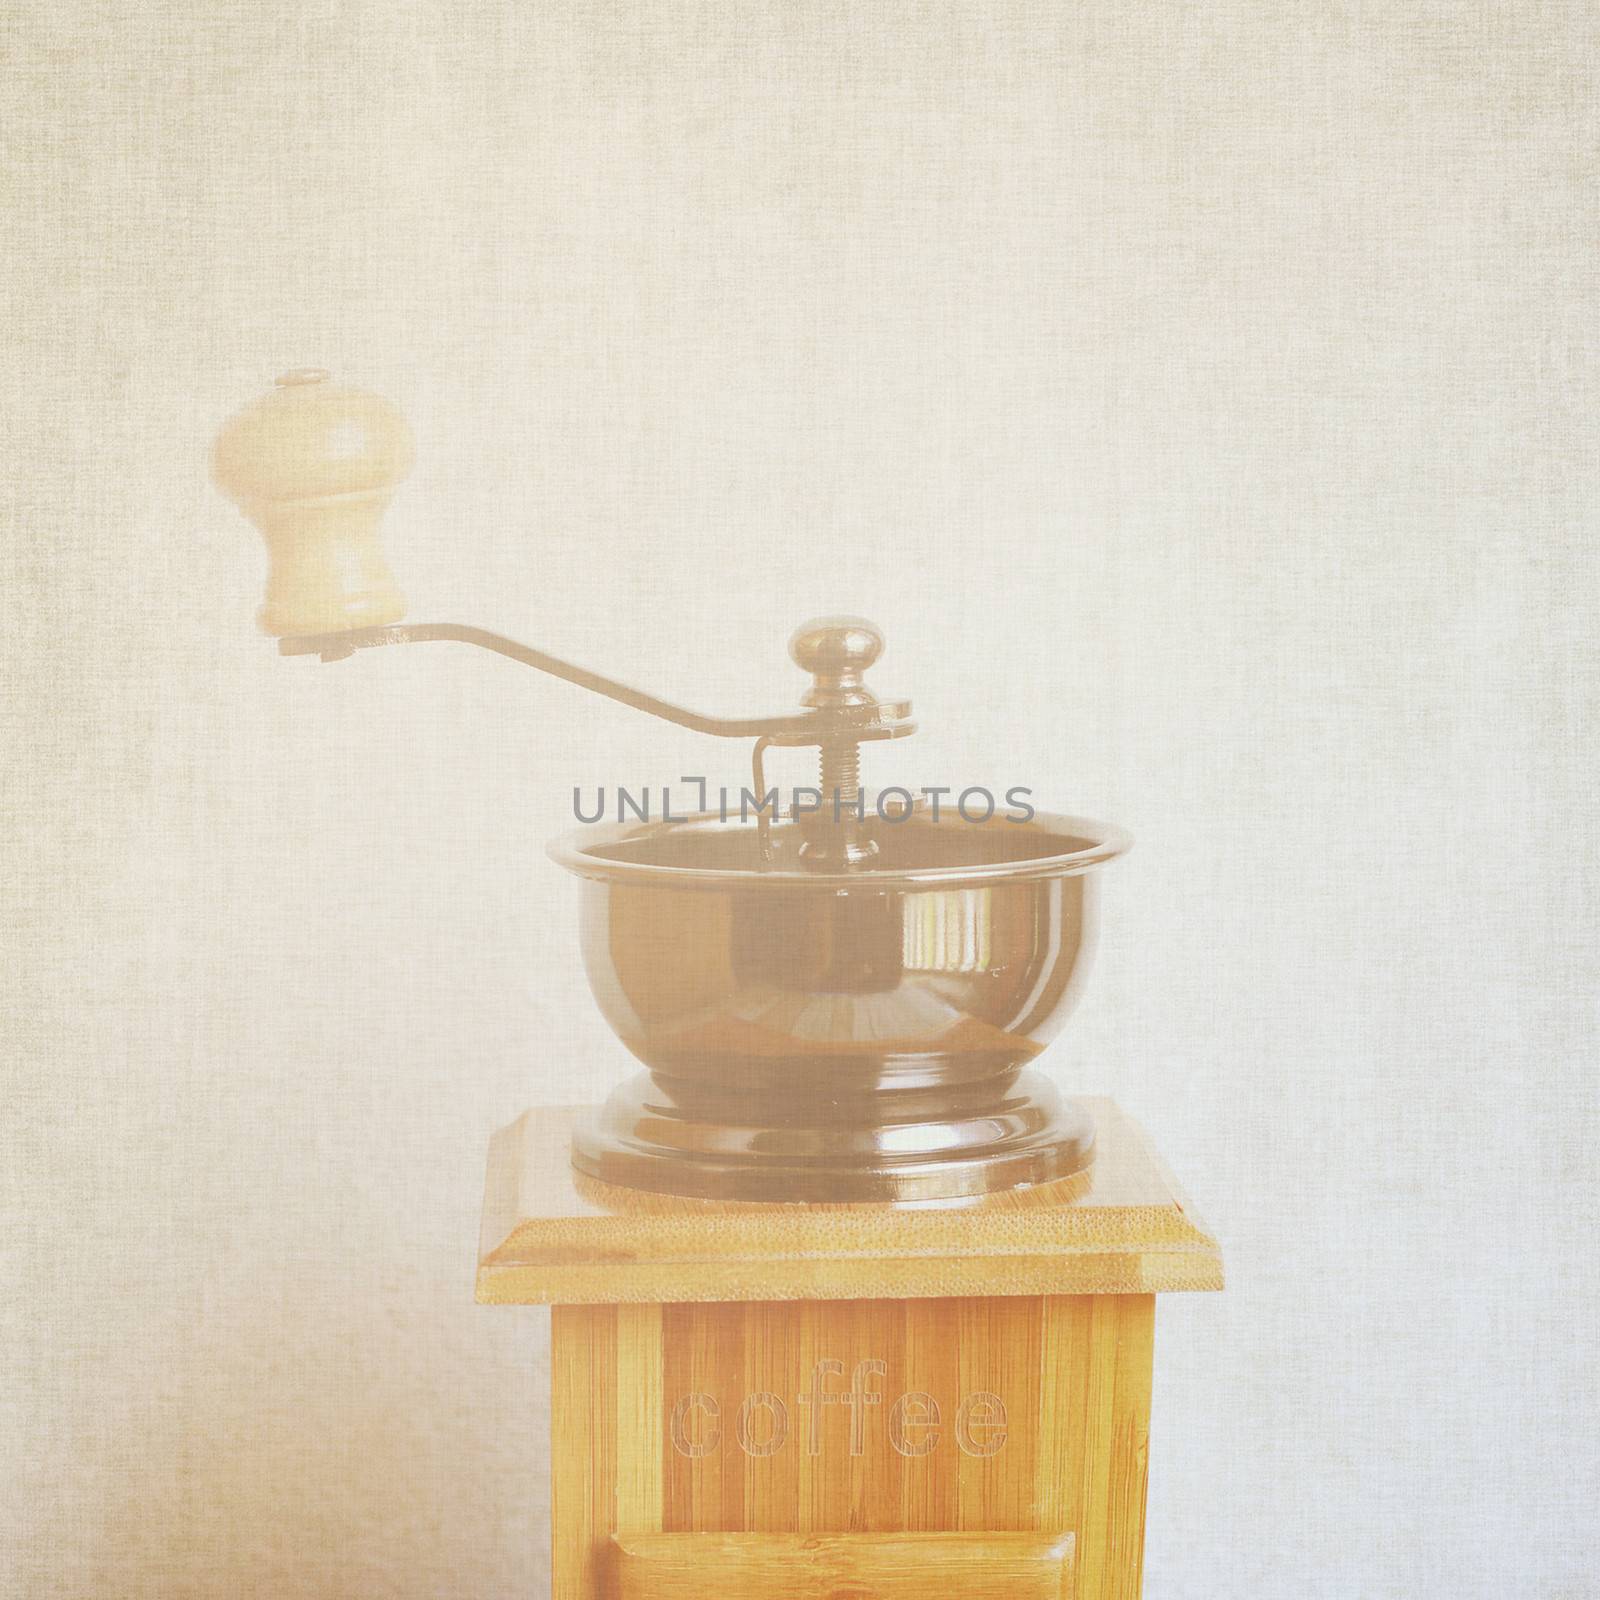 Coffee grinder with retro filter effect